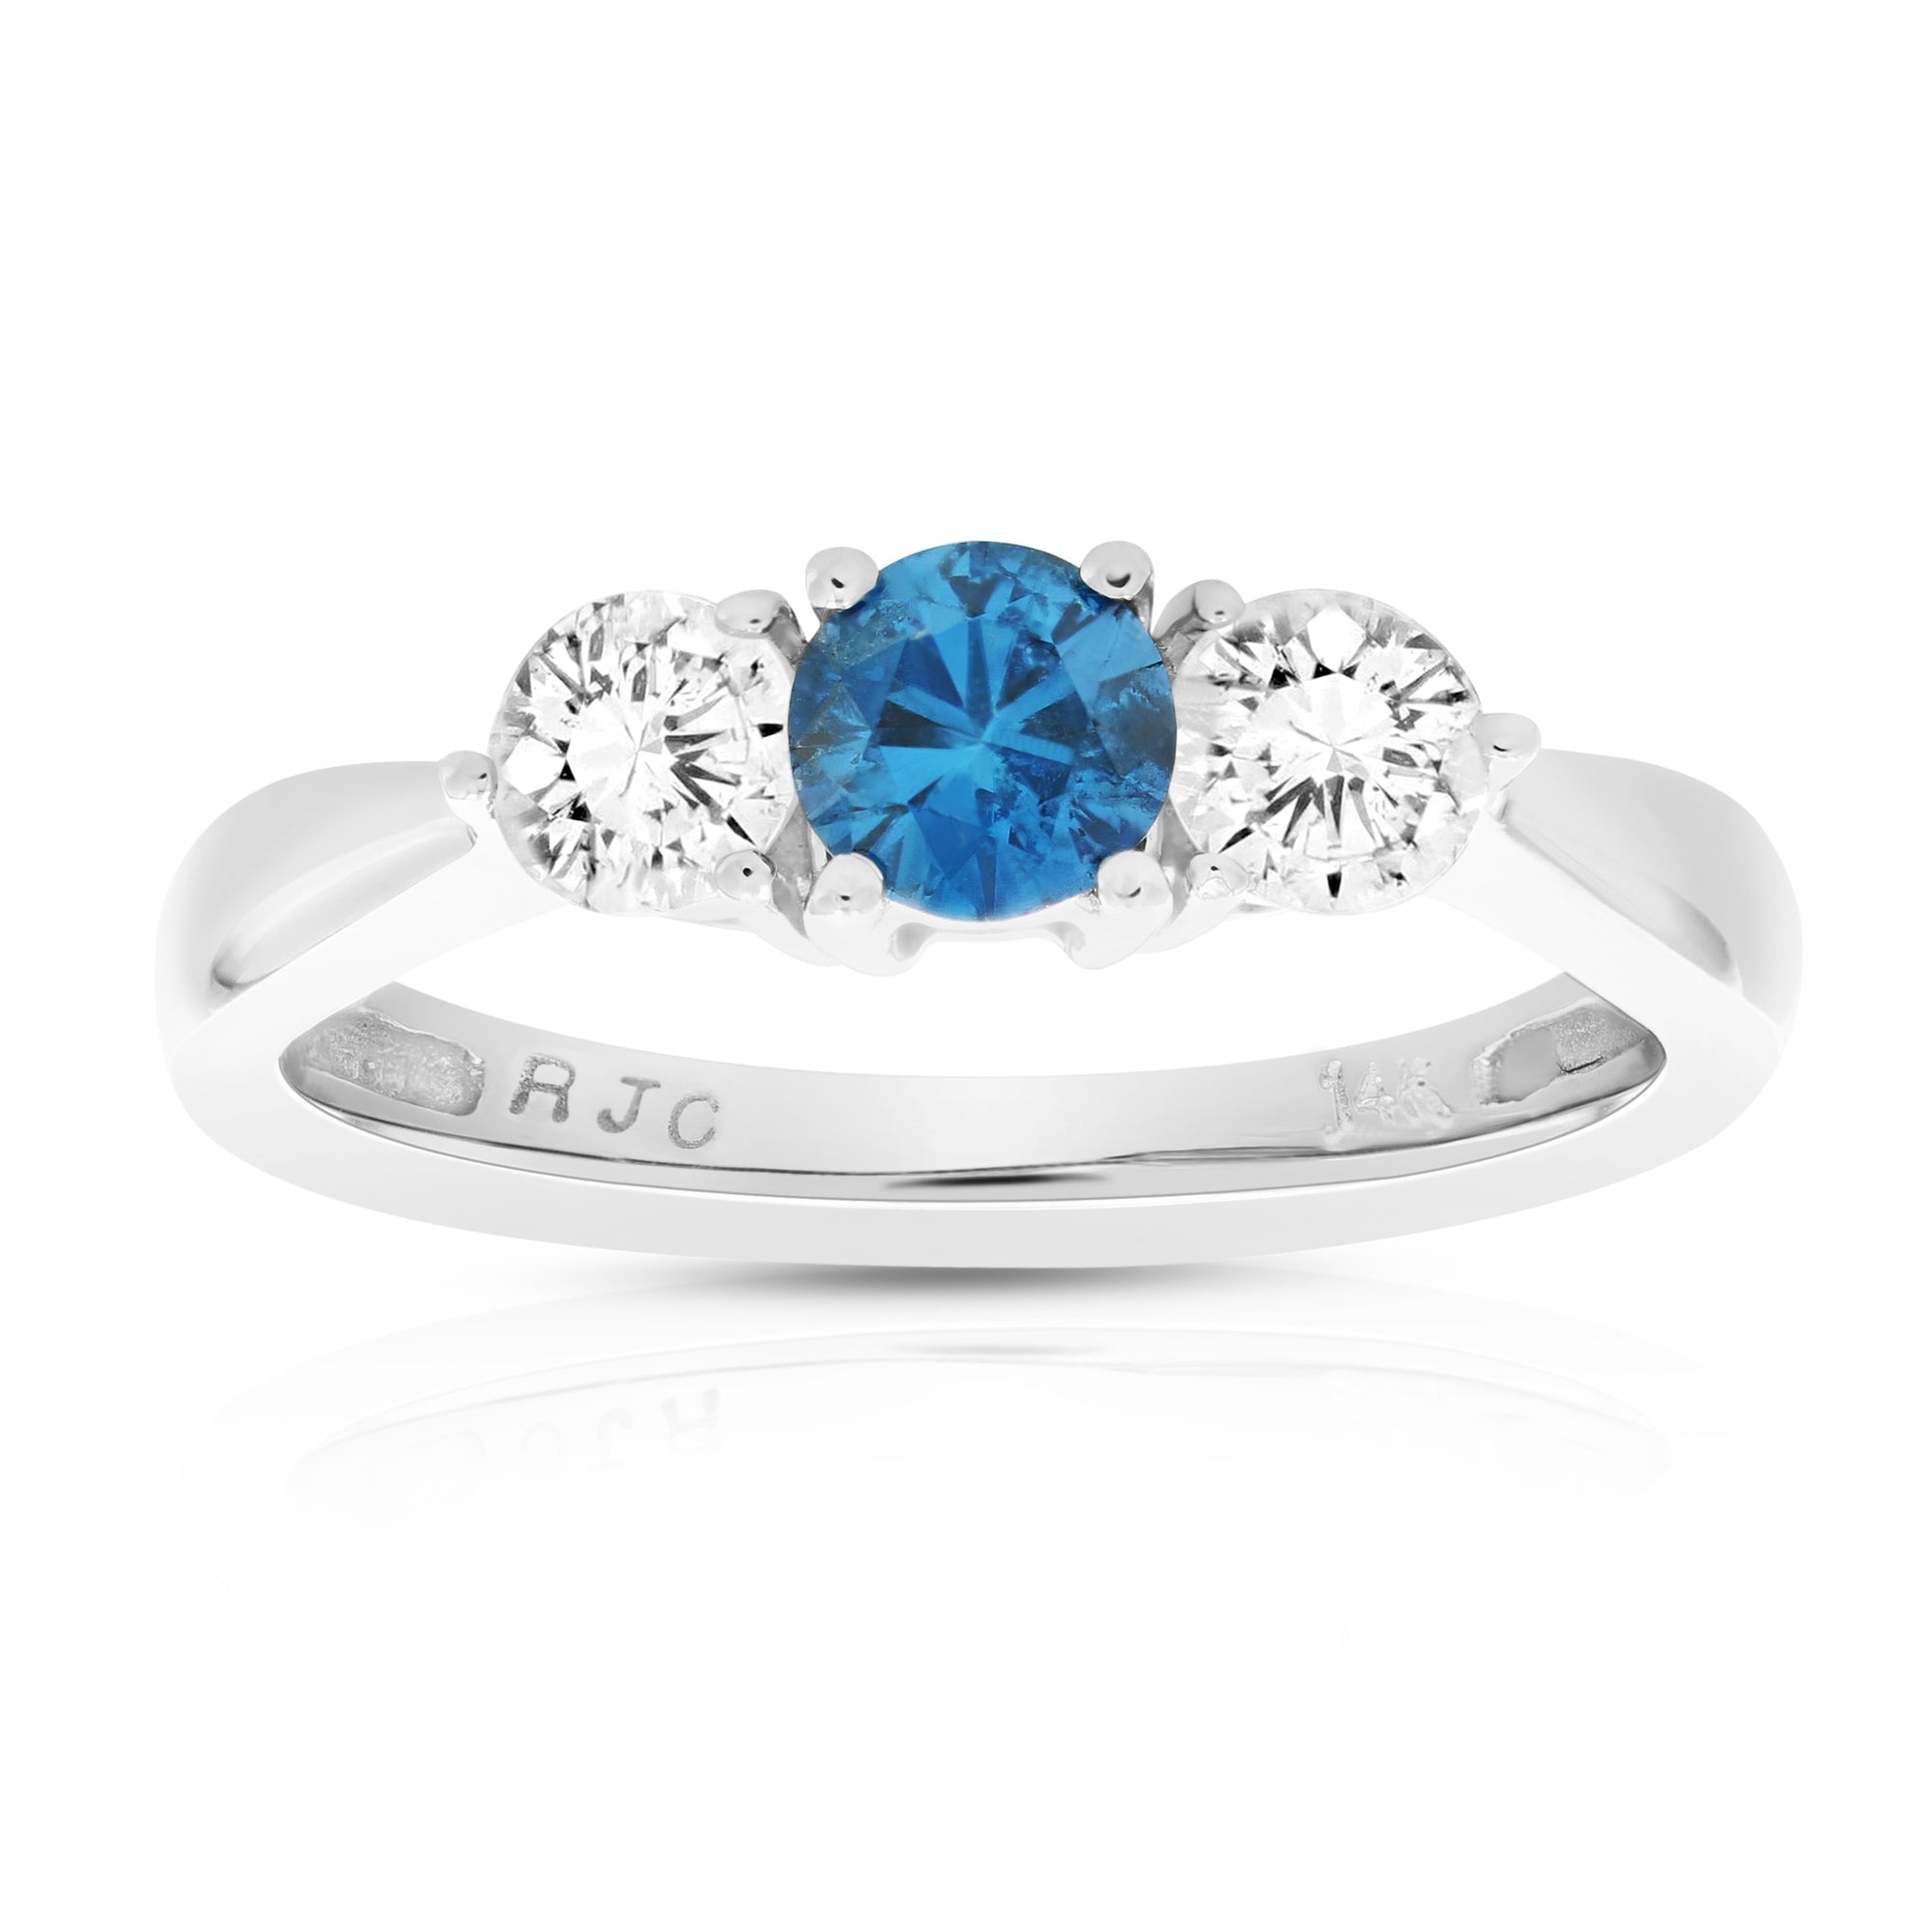 1 cttw Blue and White Diamond 3 Stone Engagement Ring 10K White Gold Size 7